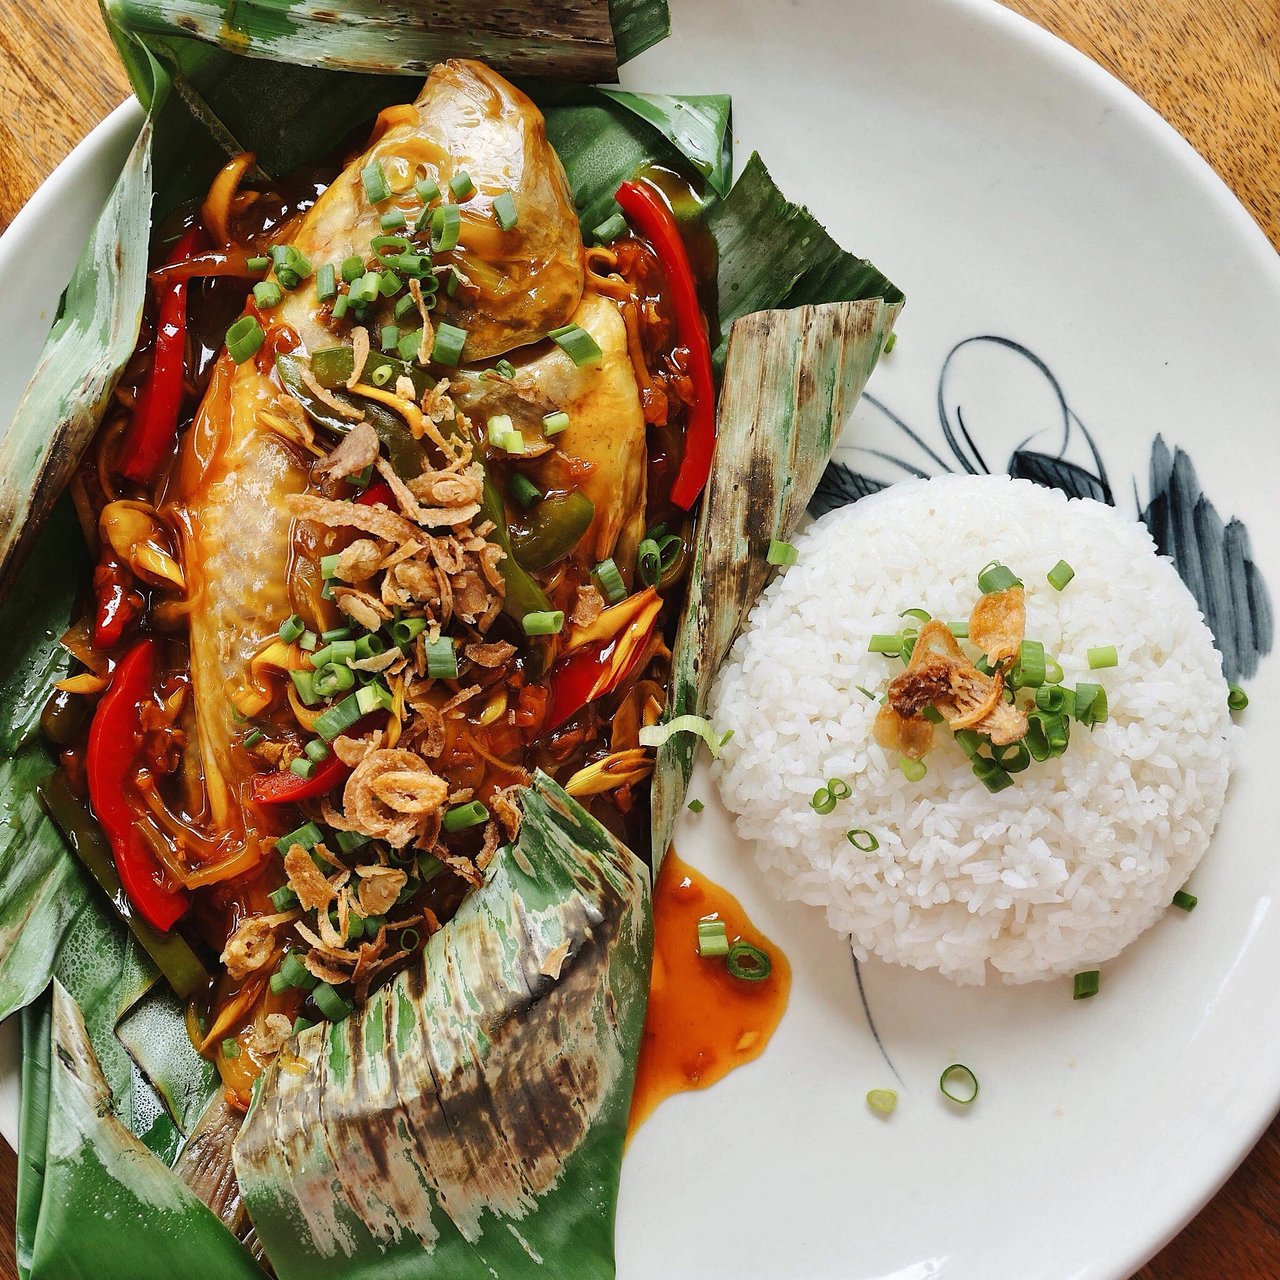 Nhan's Kitchen is a great restaurant in Hoi An for delicious Vietnamese food served with skill